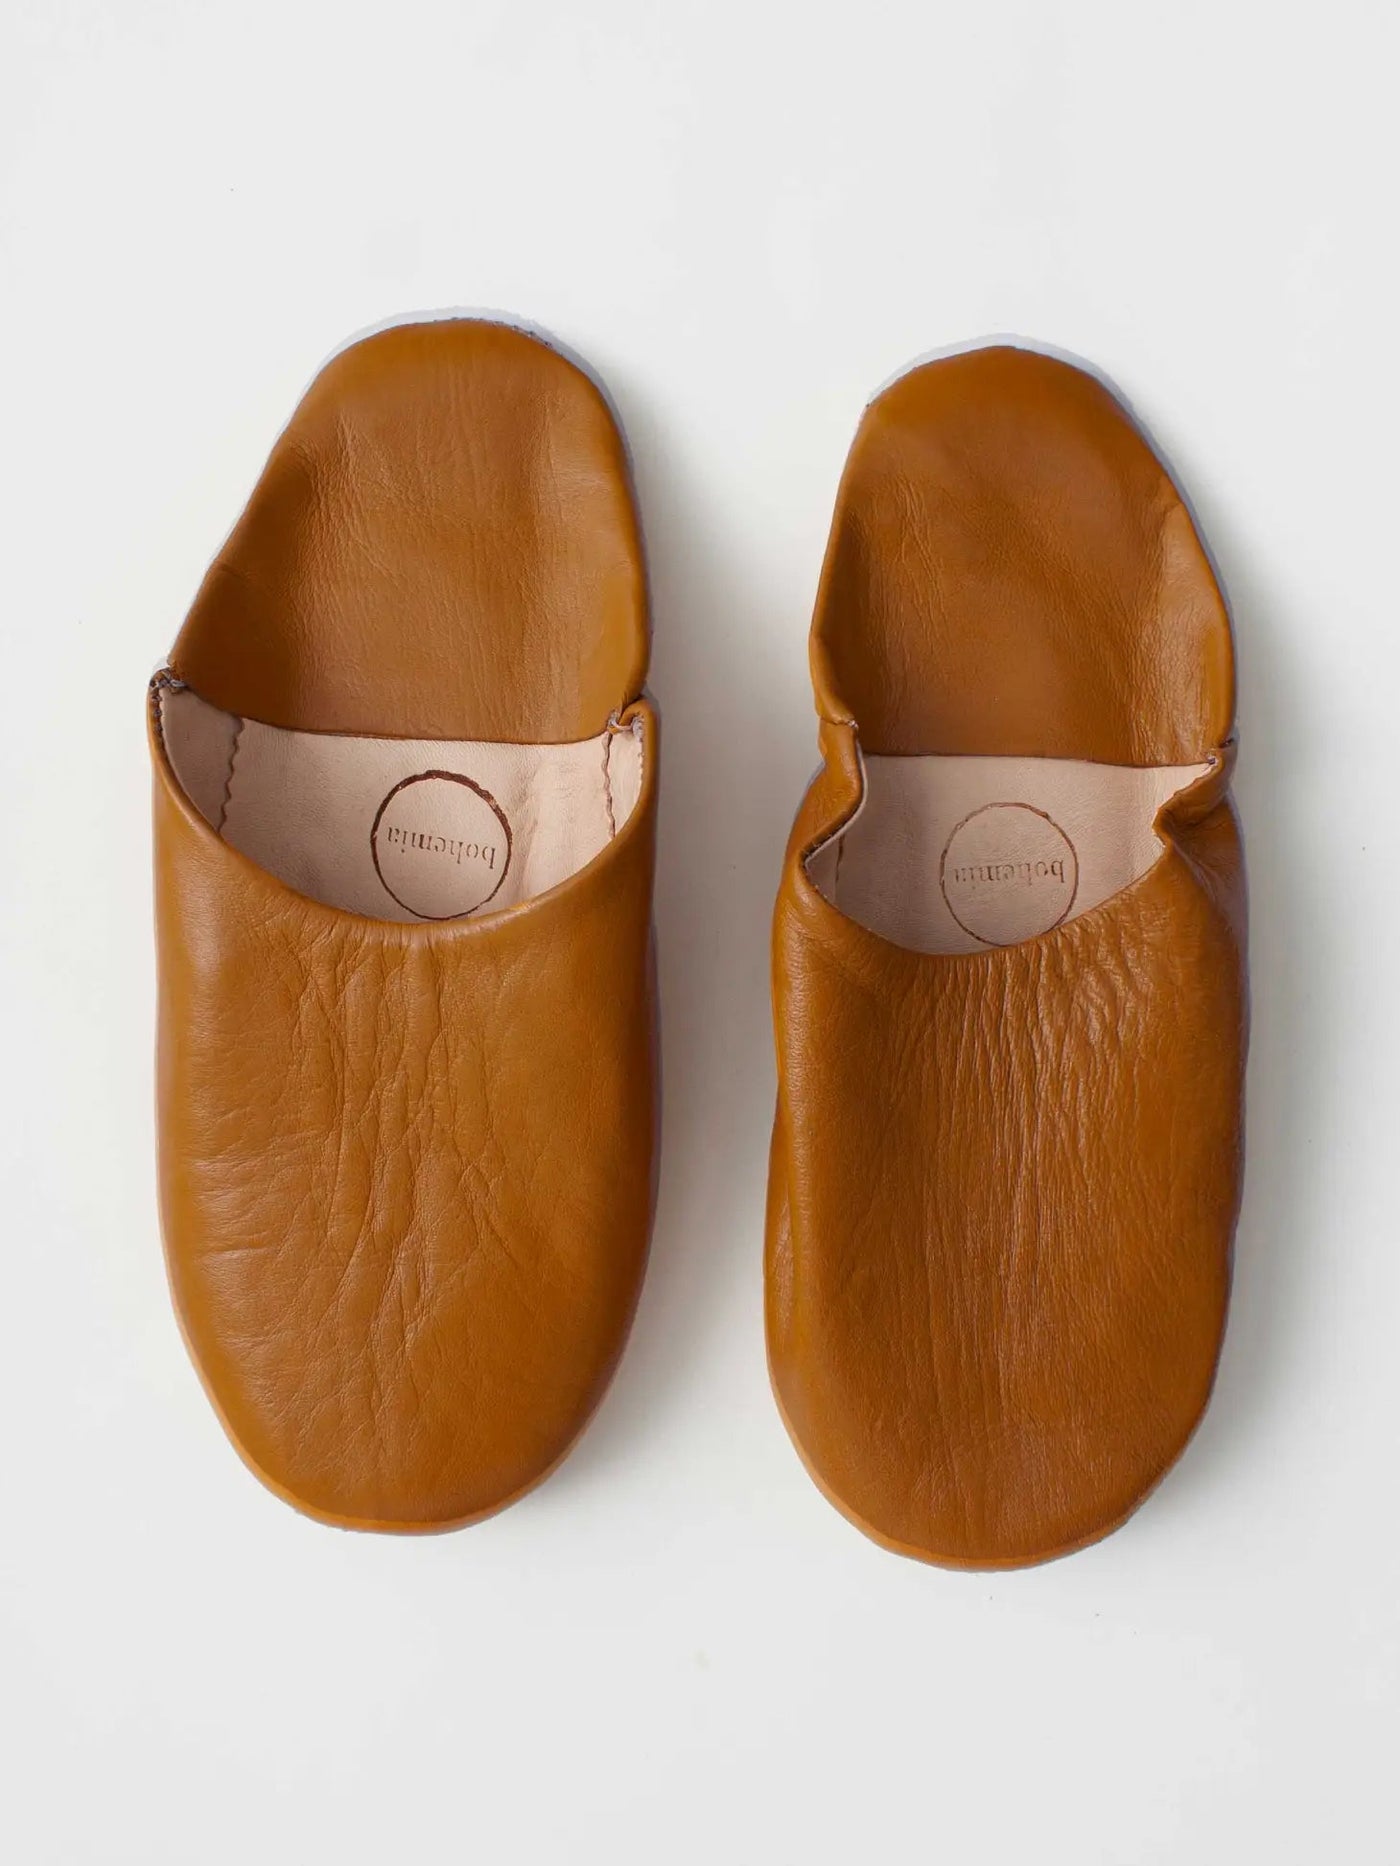 Babouche Moroccan Slippers - Caramel-Jade and May-Slippers-Jade and May